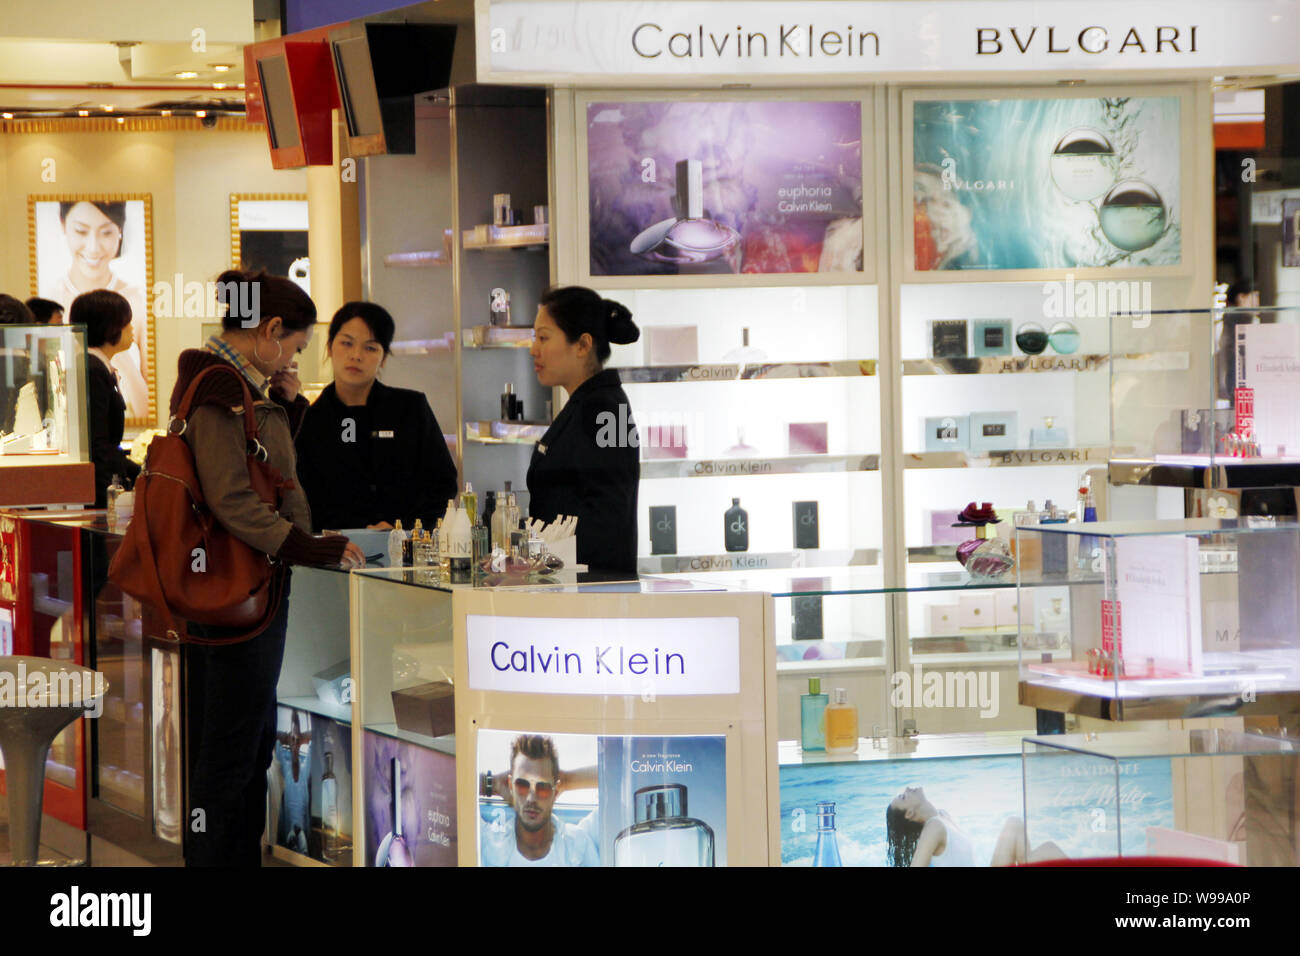 FILE--A customer shops for Calvin Klein perfume at a tax refund shopping  mall in Haikou city, south Chinas Hainan province, 1 January 2011. Hainan  Stock Photo - Alamy